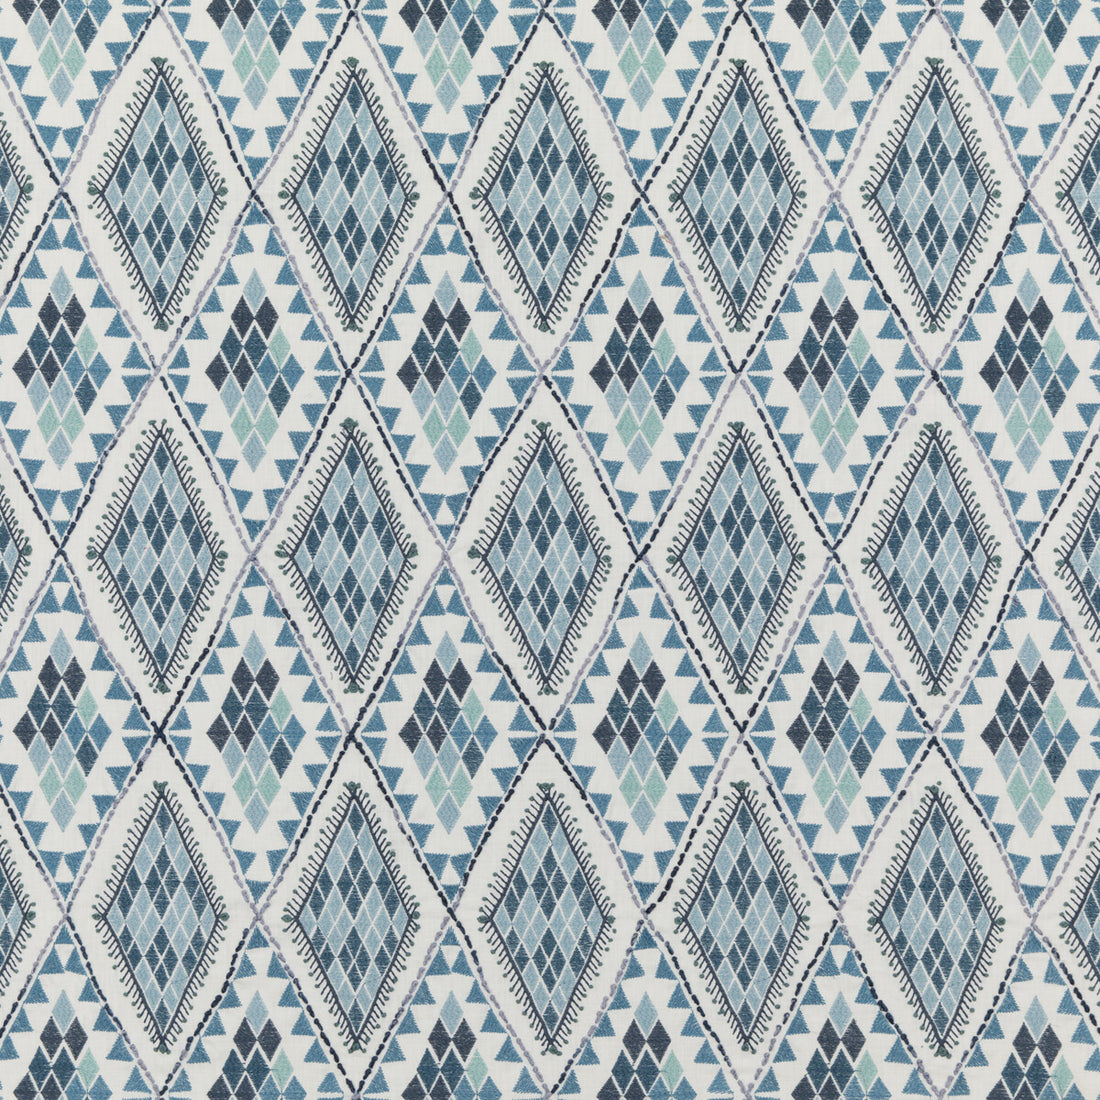 Castelo fabric in indigo color - pattern PF50443.1.0 - by Baker Lifestyle in the Homes &amp; Gardens III collection